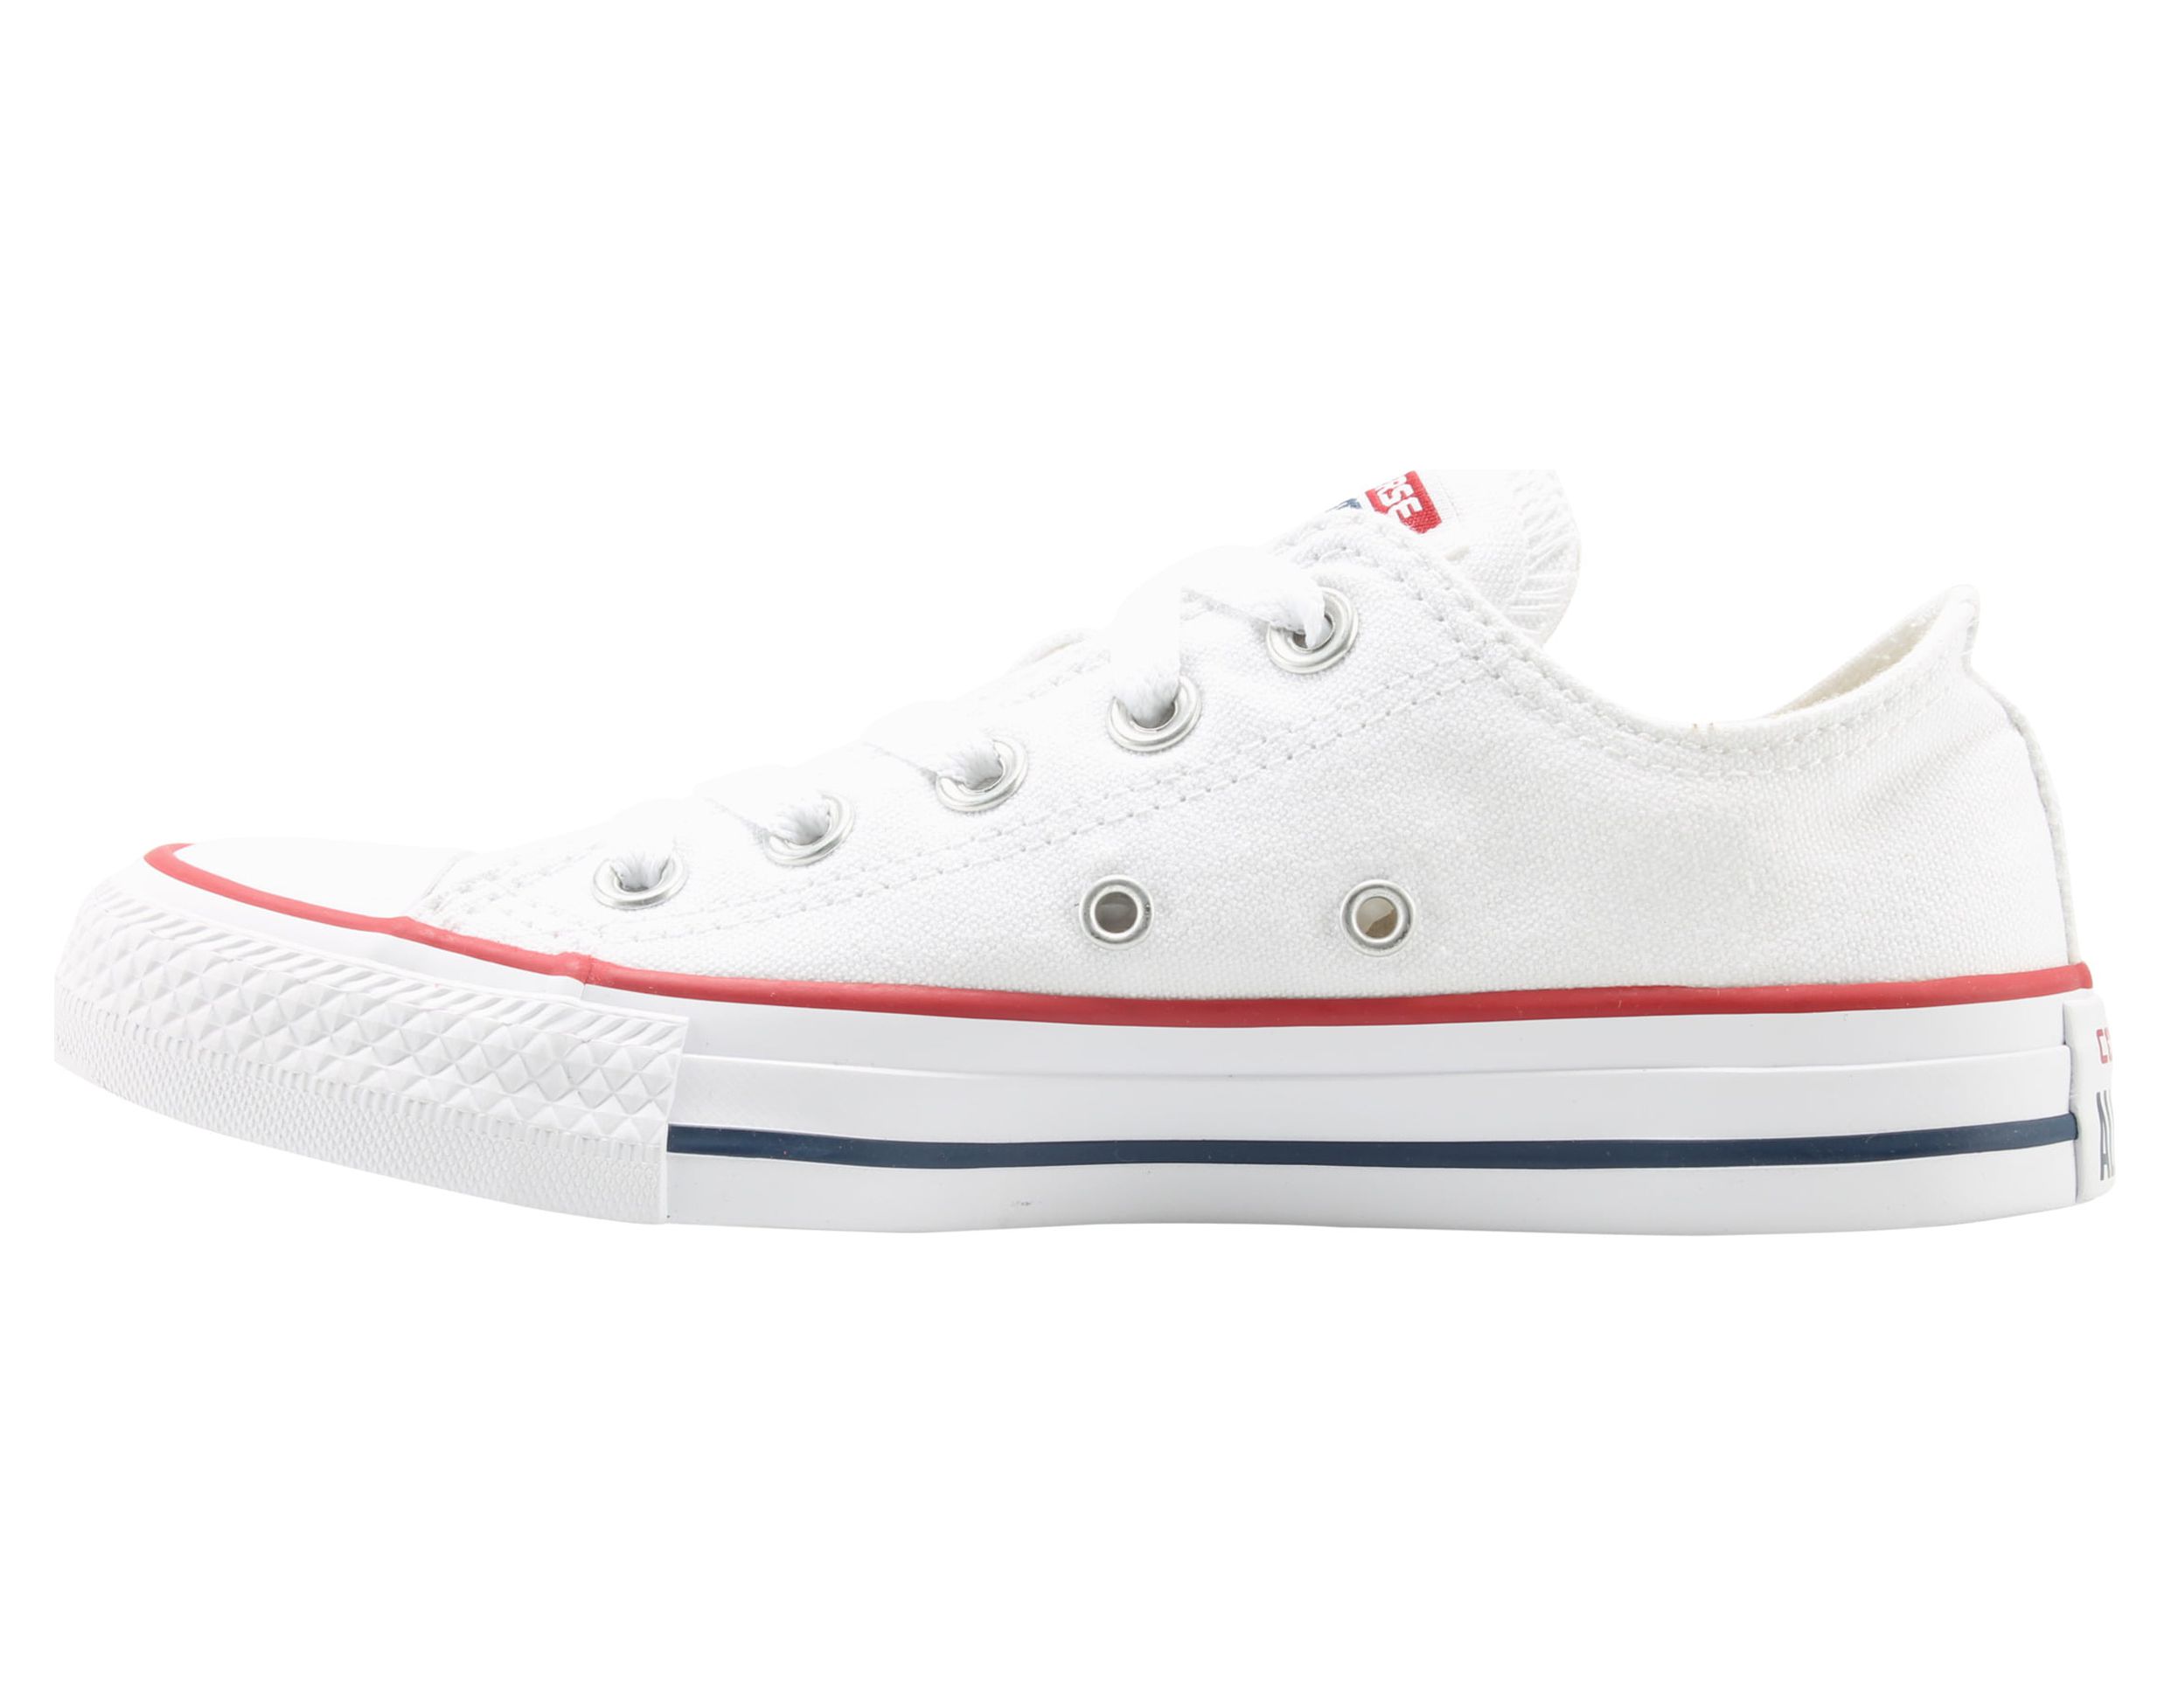 Converse M Converse Chuck Taylor All Star Ox M7652 - image 3 of 6